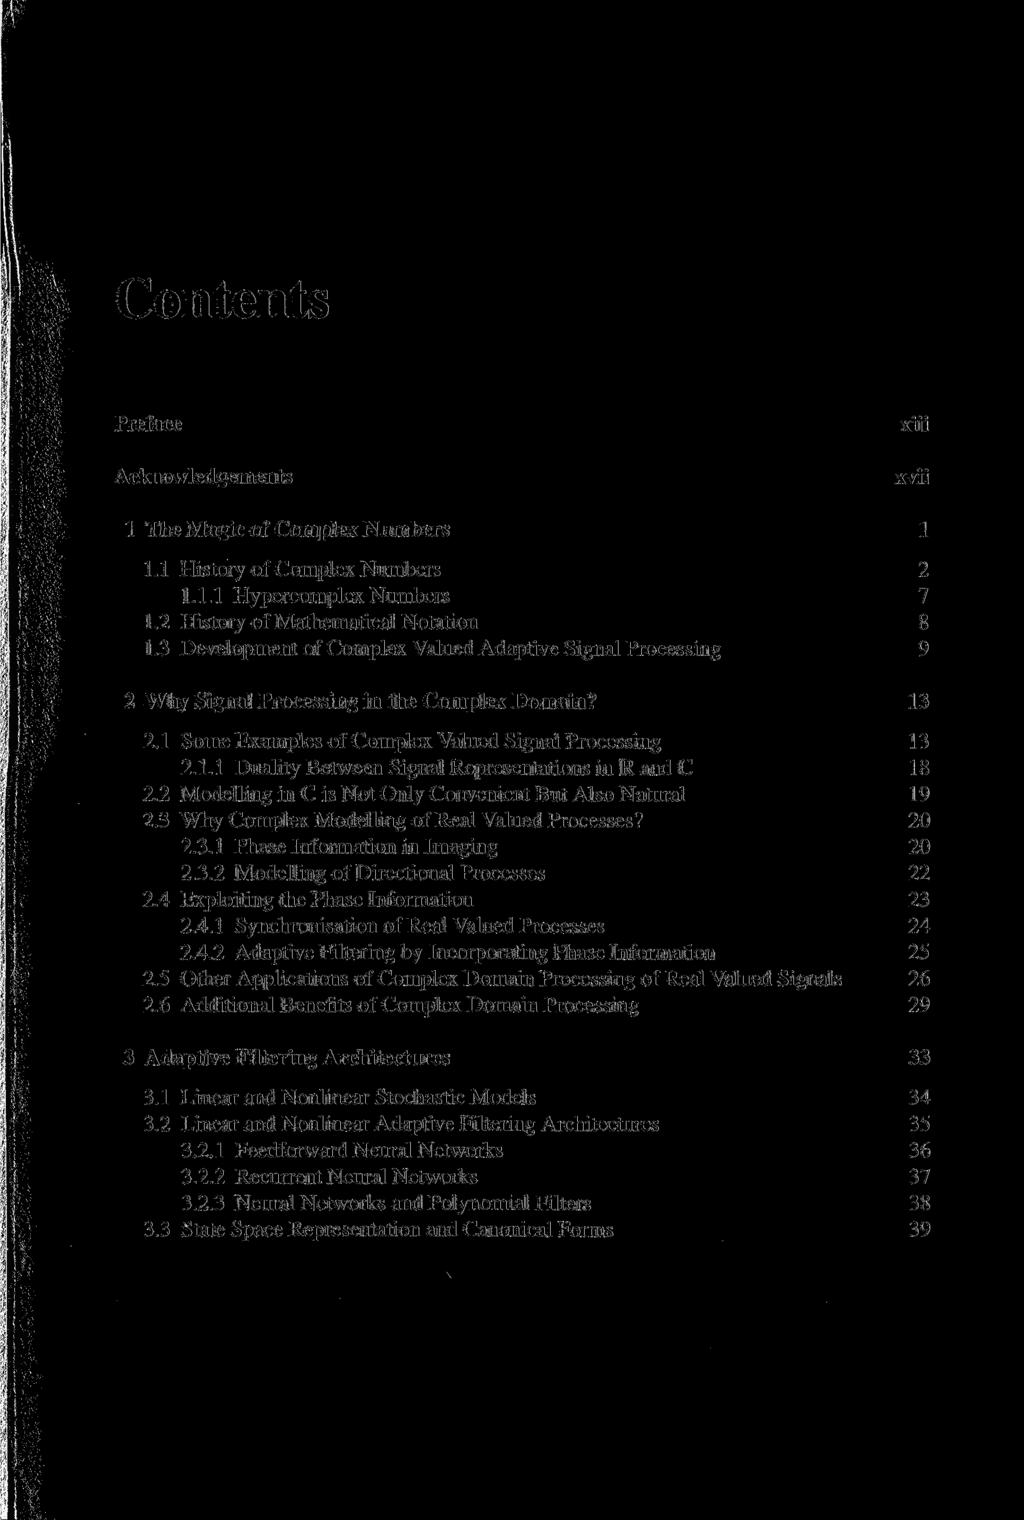 Contents Preface Acknowledgements xiii xvii 1 The Magic of Complex Numbers 1 1.1 History of Complex Numbers 2 1.1.1 Hypercomplex Numbers 7 1.2 History of Mathematical Notation 8 1.